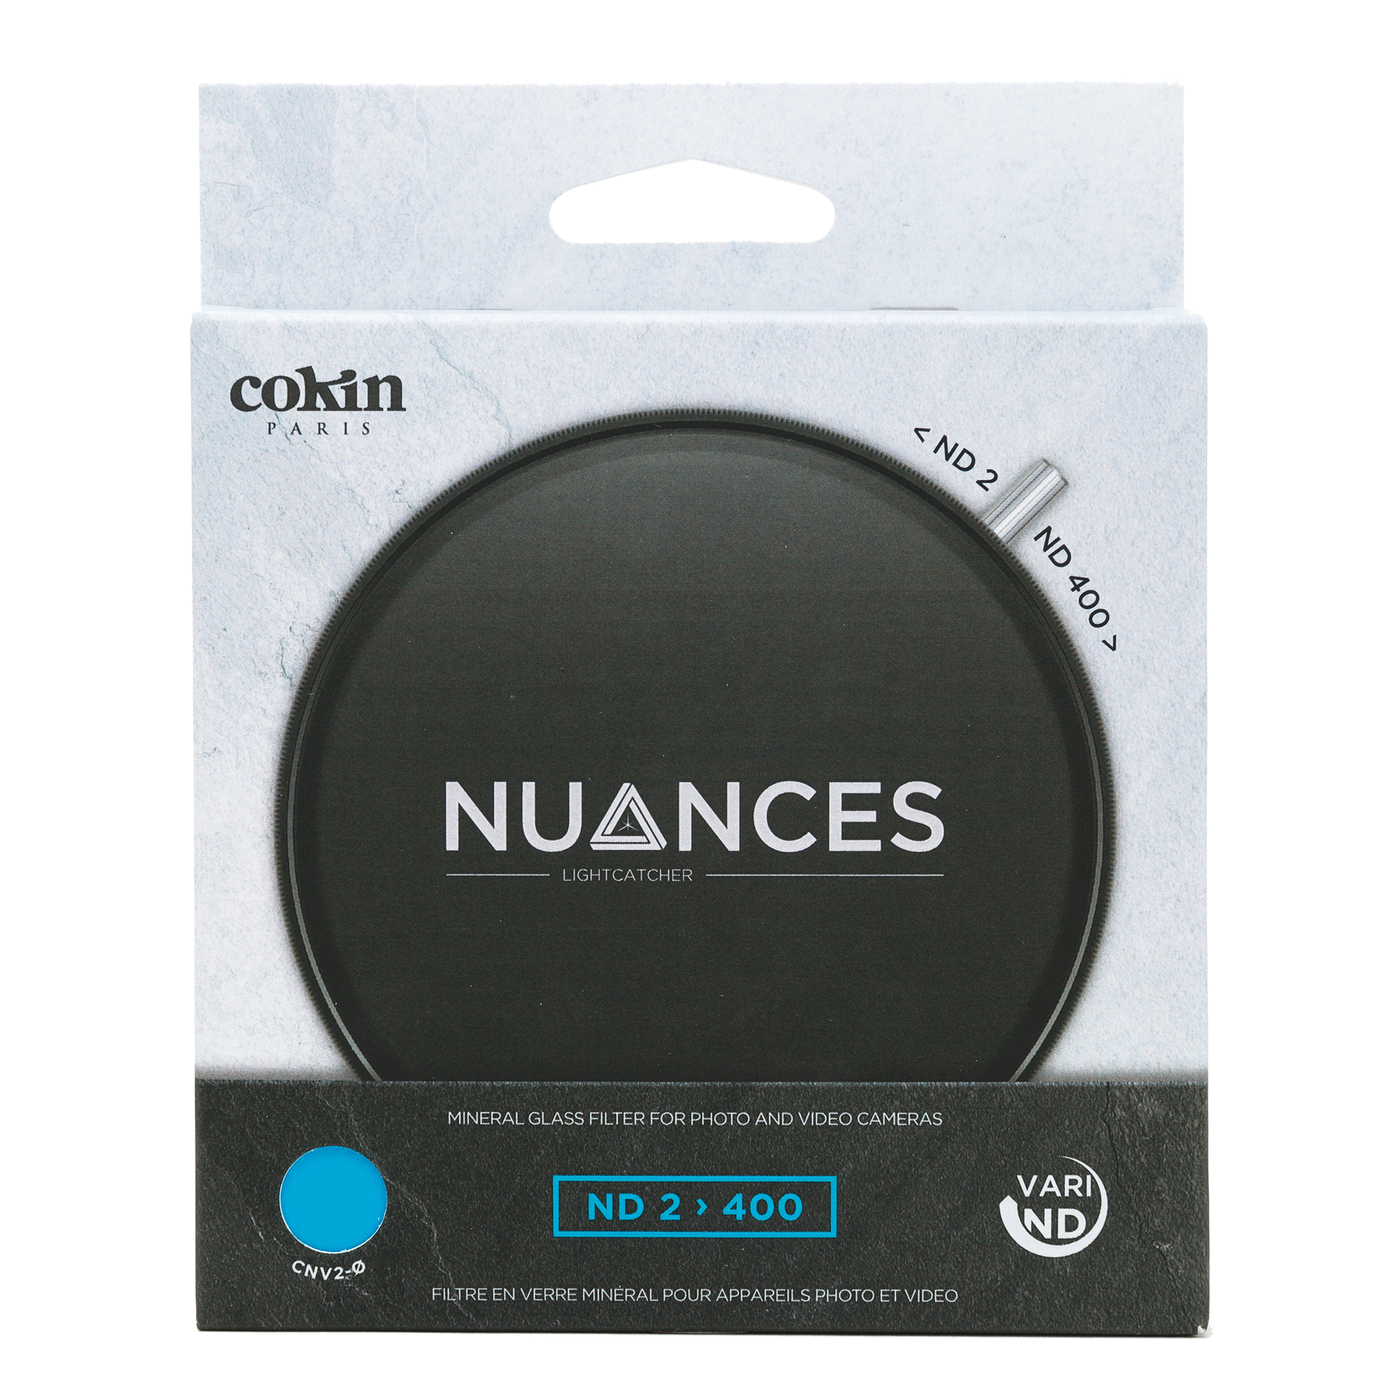 Front of box for cokin nuances variable ND camera filter